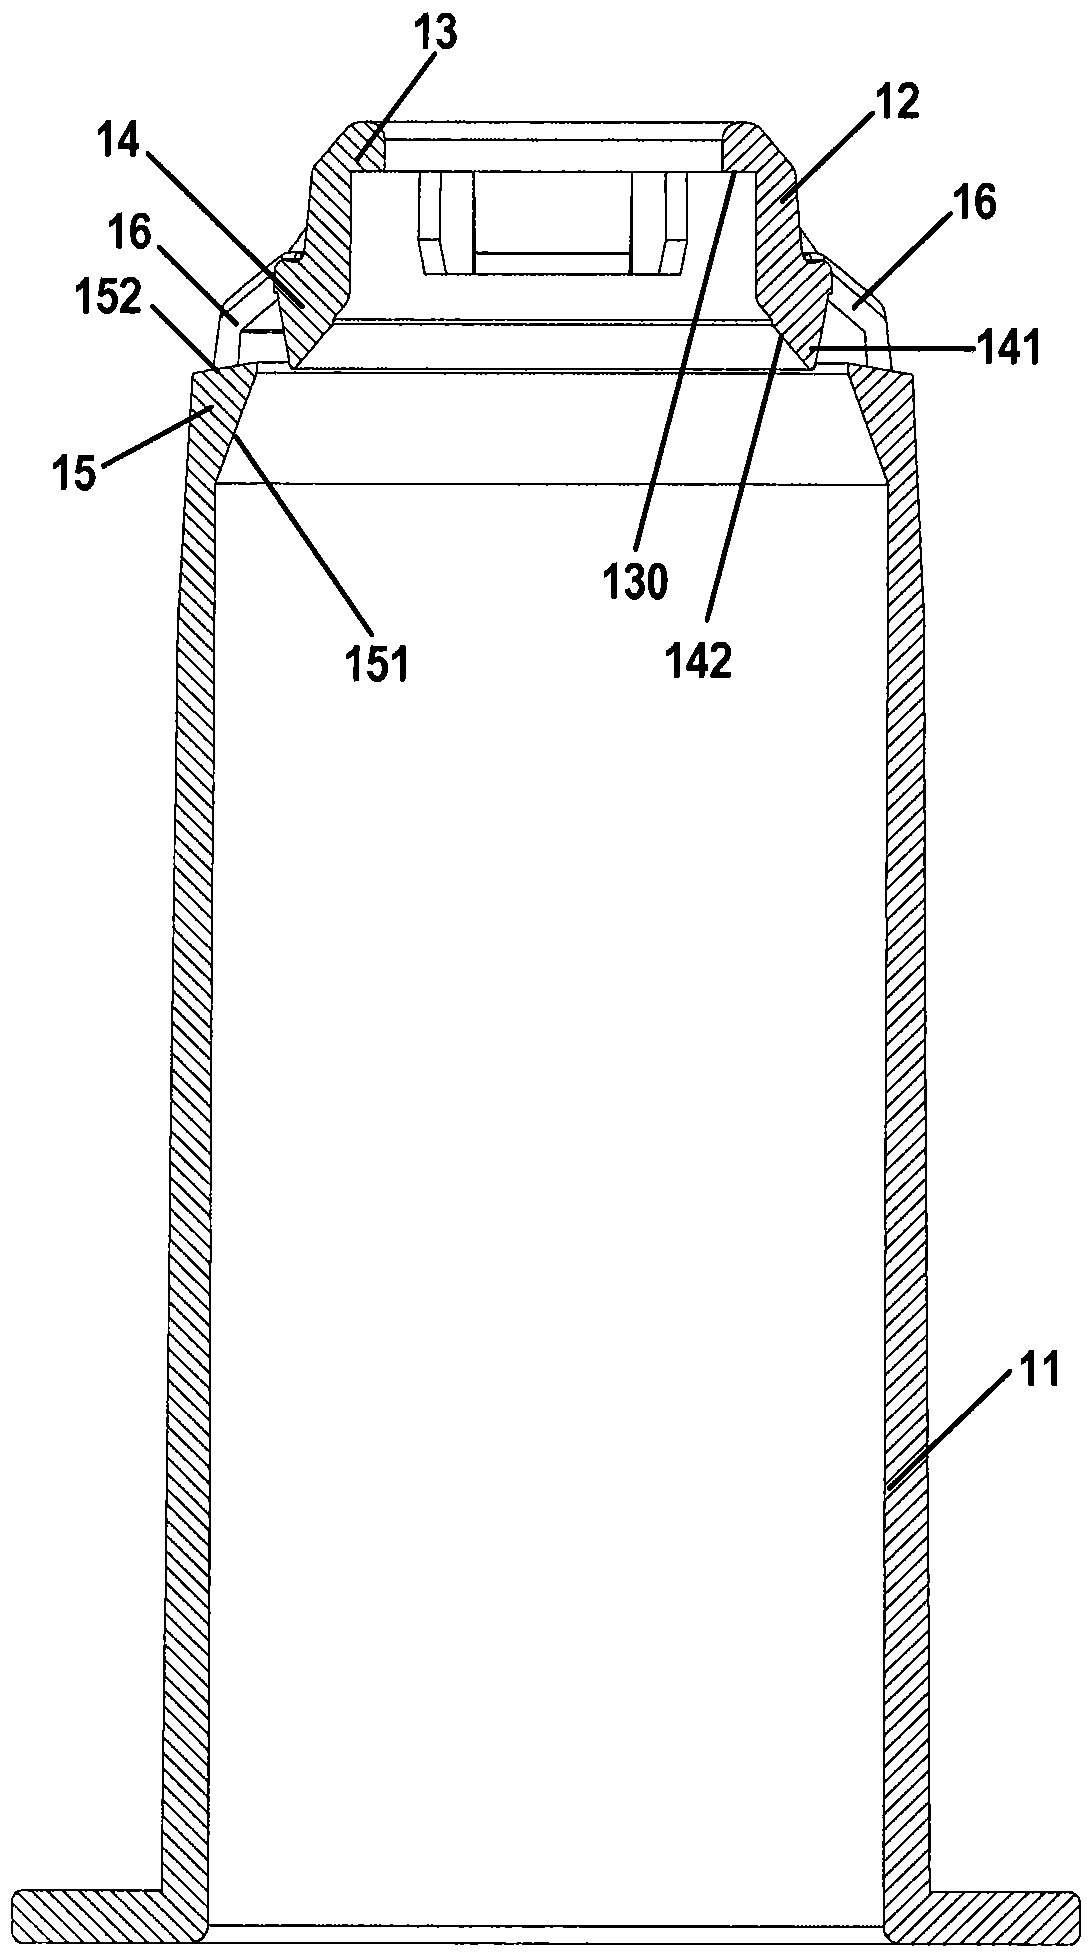 Needle Retrieval Set with Needle Holder Assembly and Retrieval Tube Assembly